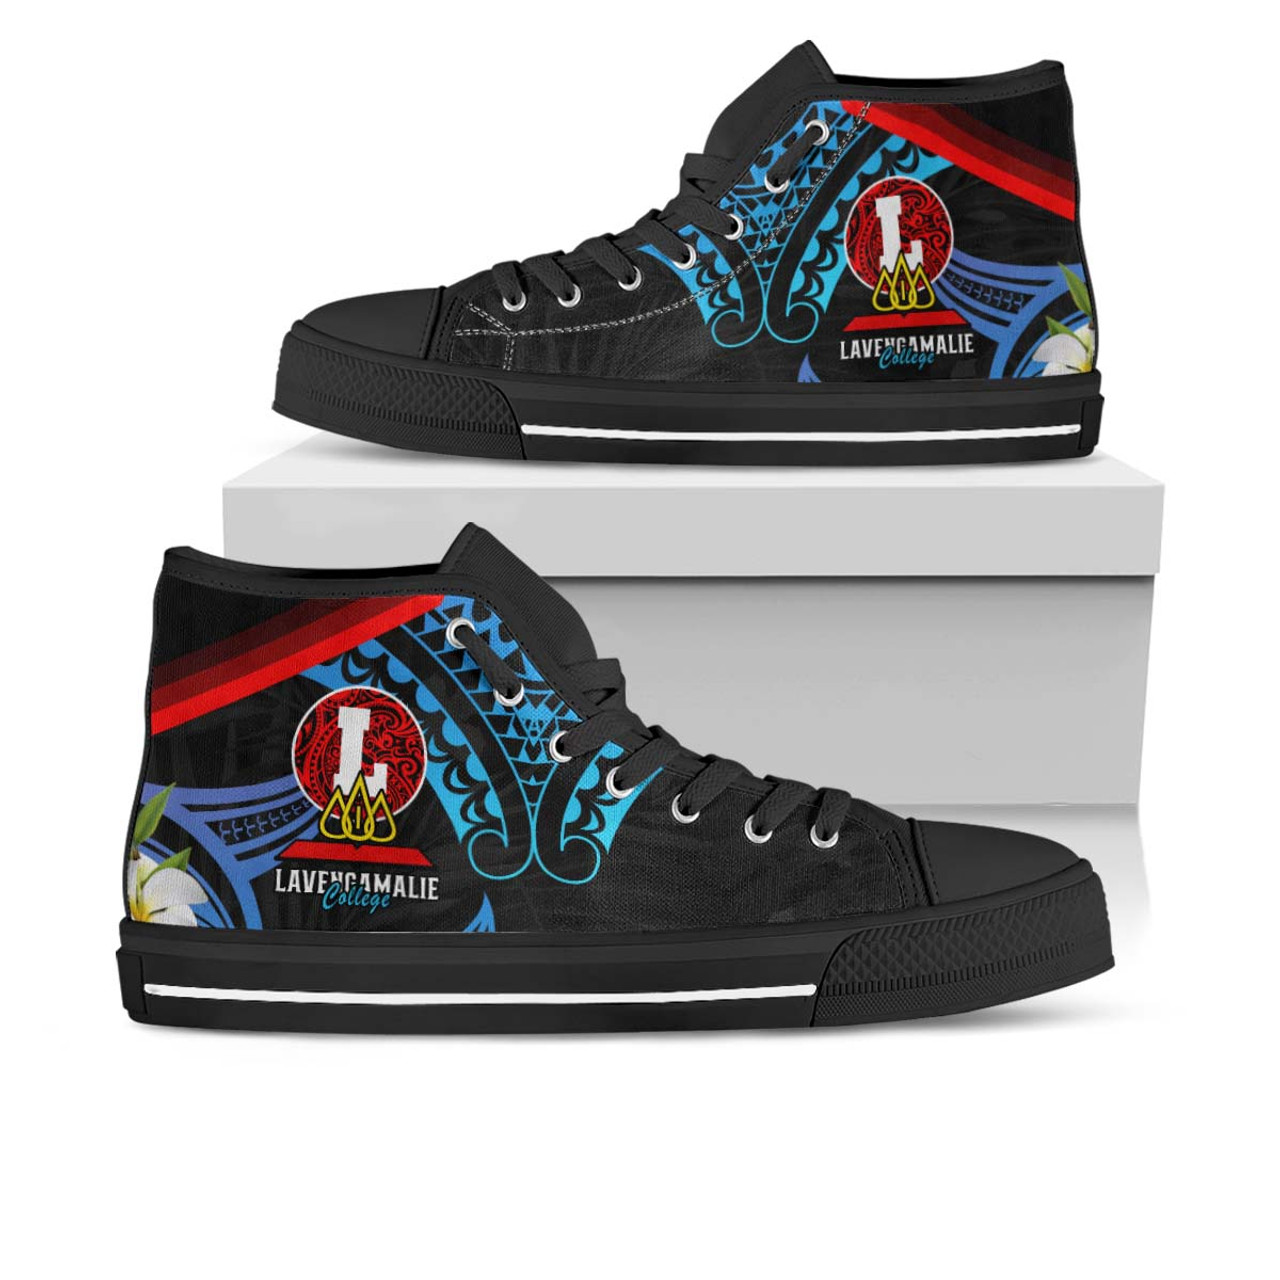 Tonga High Top Shoes - Lavengamalie College with Polynesian Patterns and Plumeria Flower